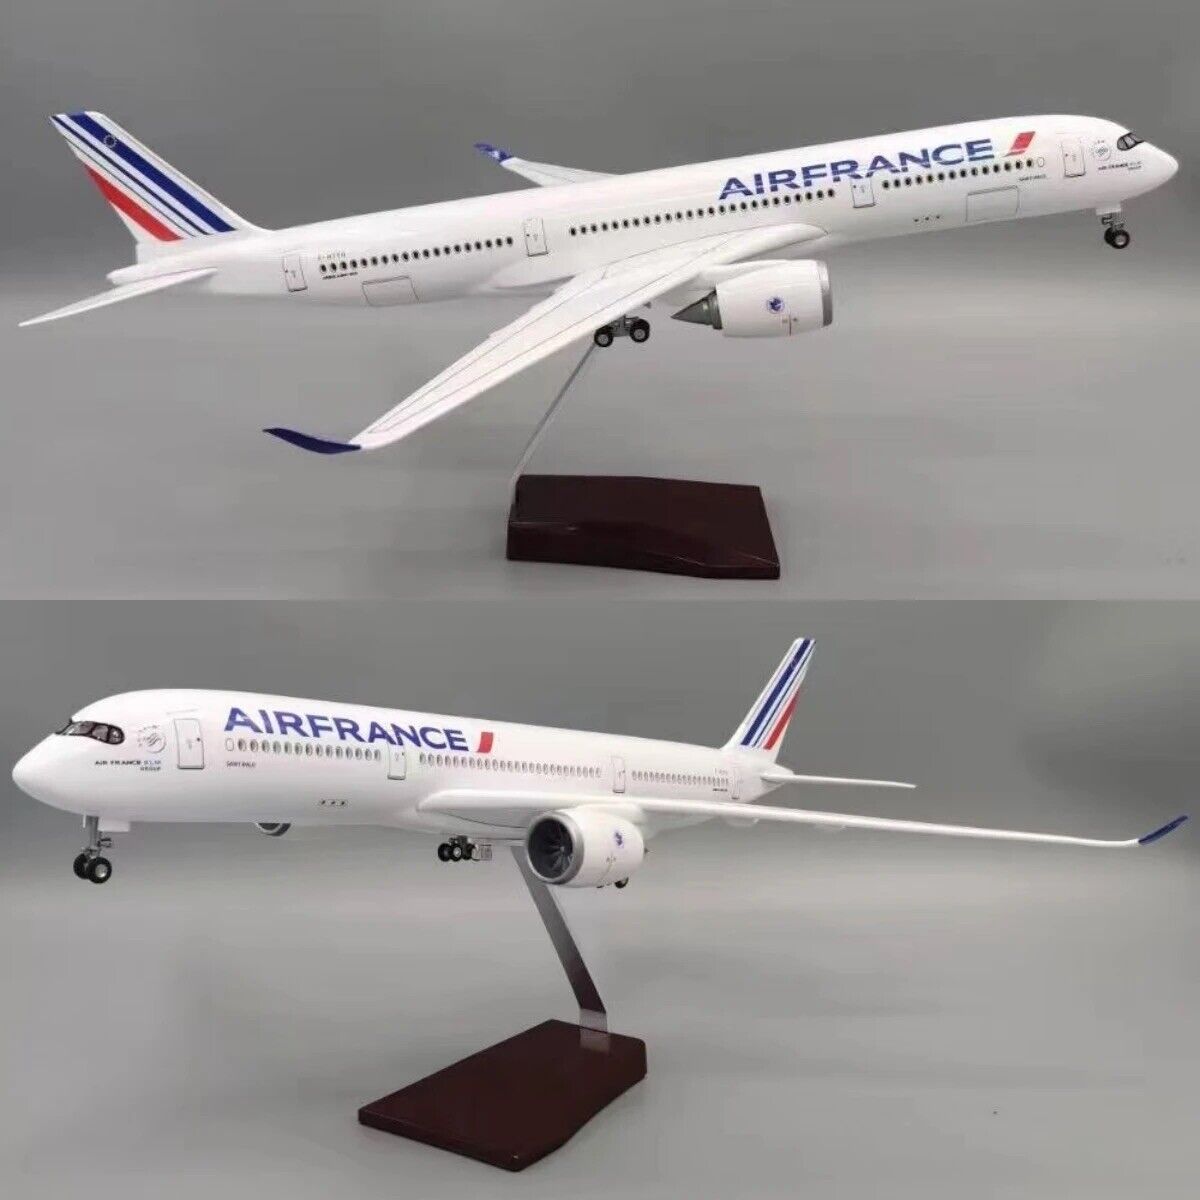 1/142 Scale Airplane Model - Air France Airlines Airbus A350 NO LEDs UK